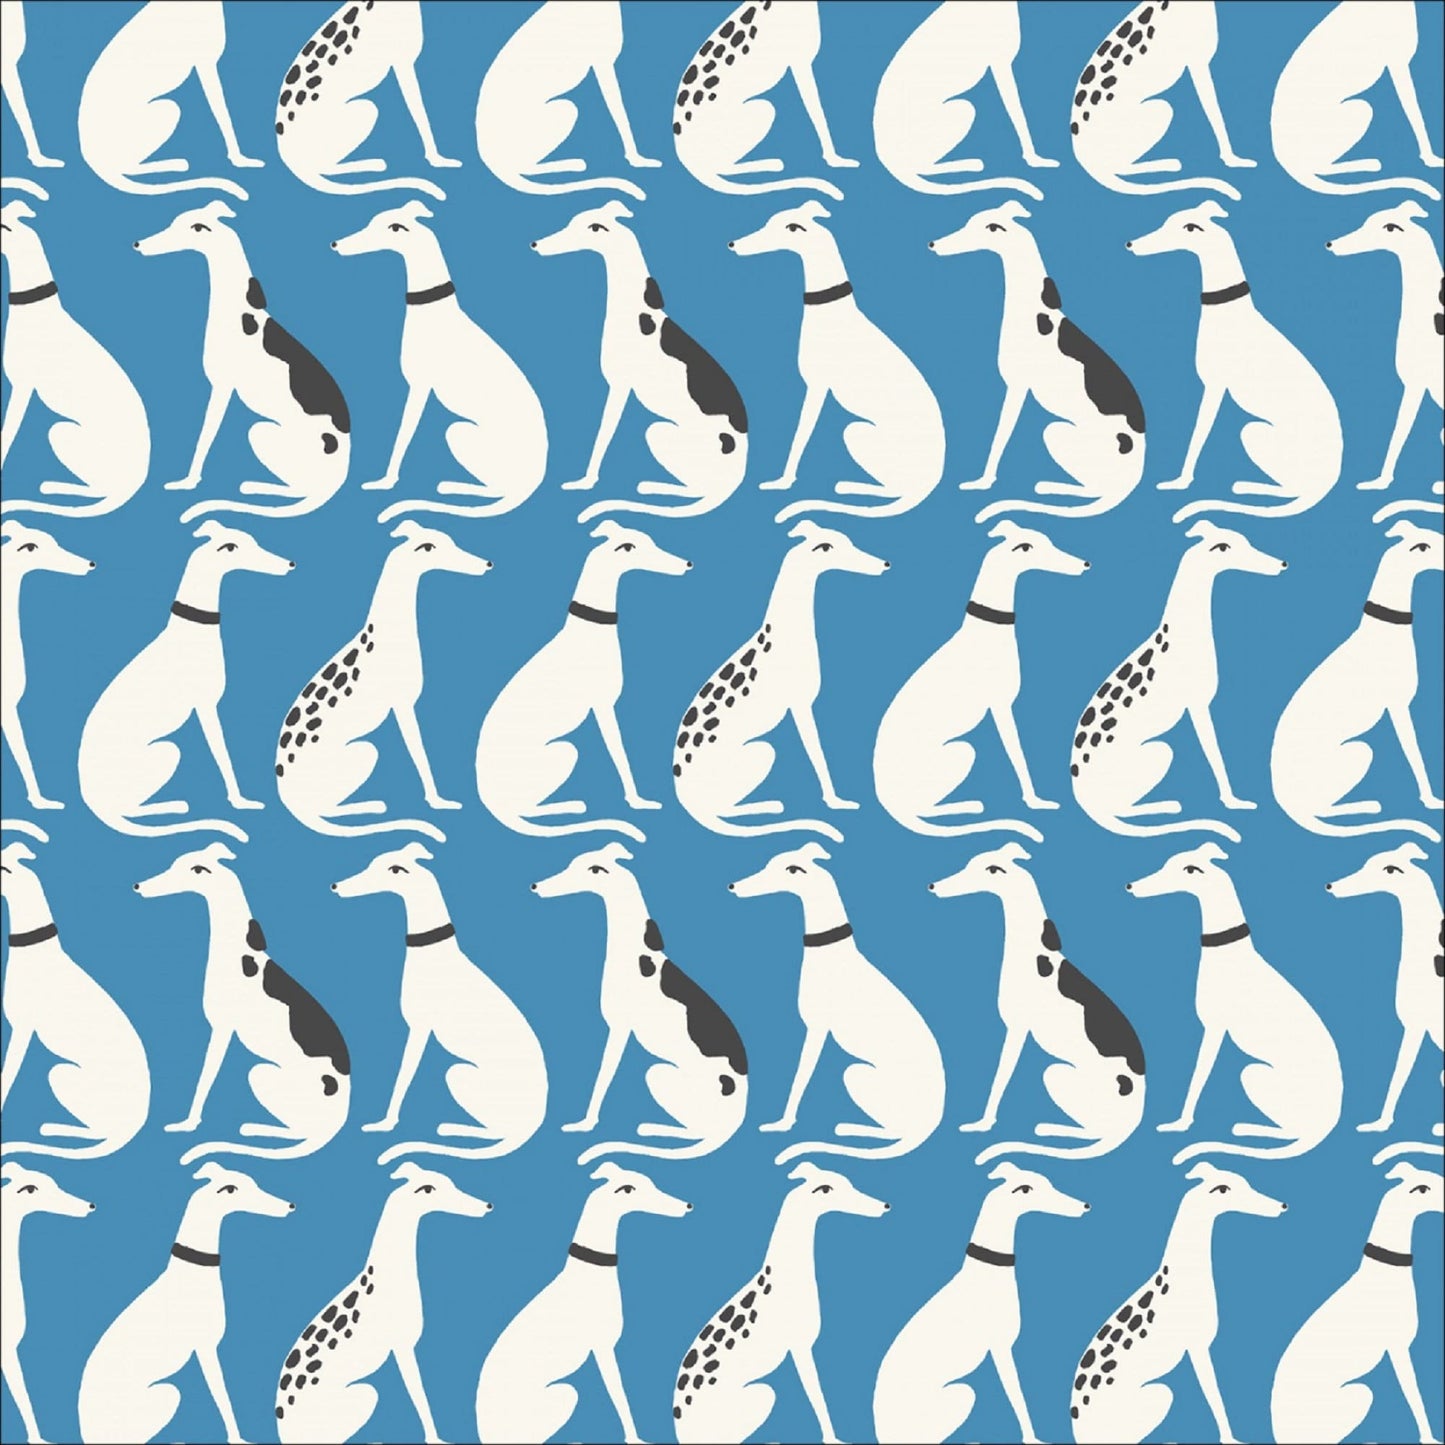 Whippets Blue Arundel Ariana Martin Cloud 9 ORGANIC Quilters Cotton Fabric Fetish